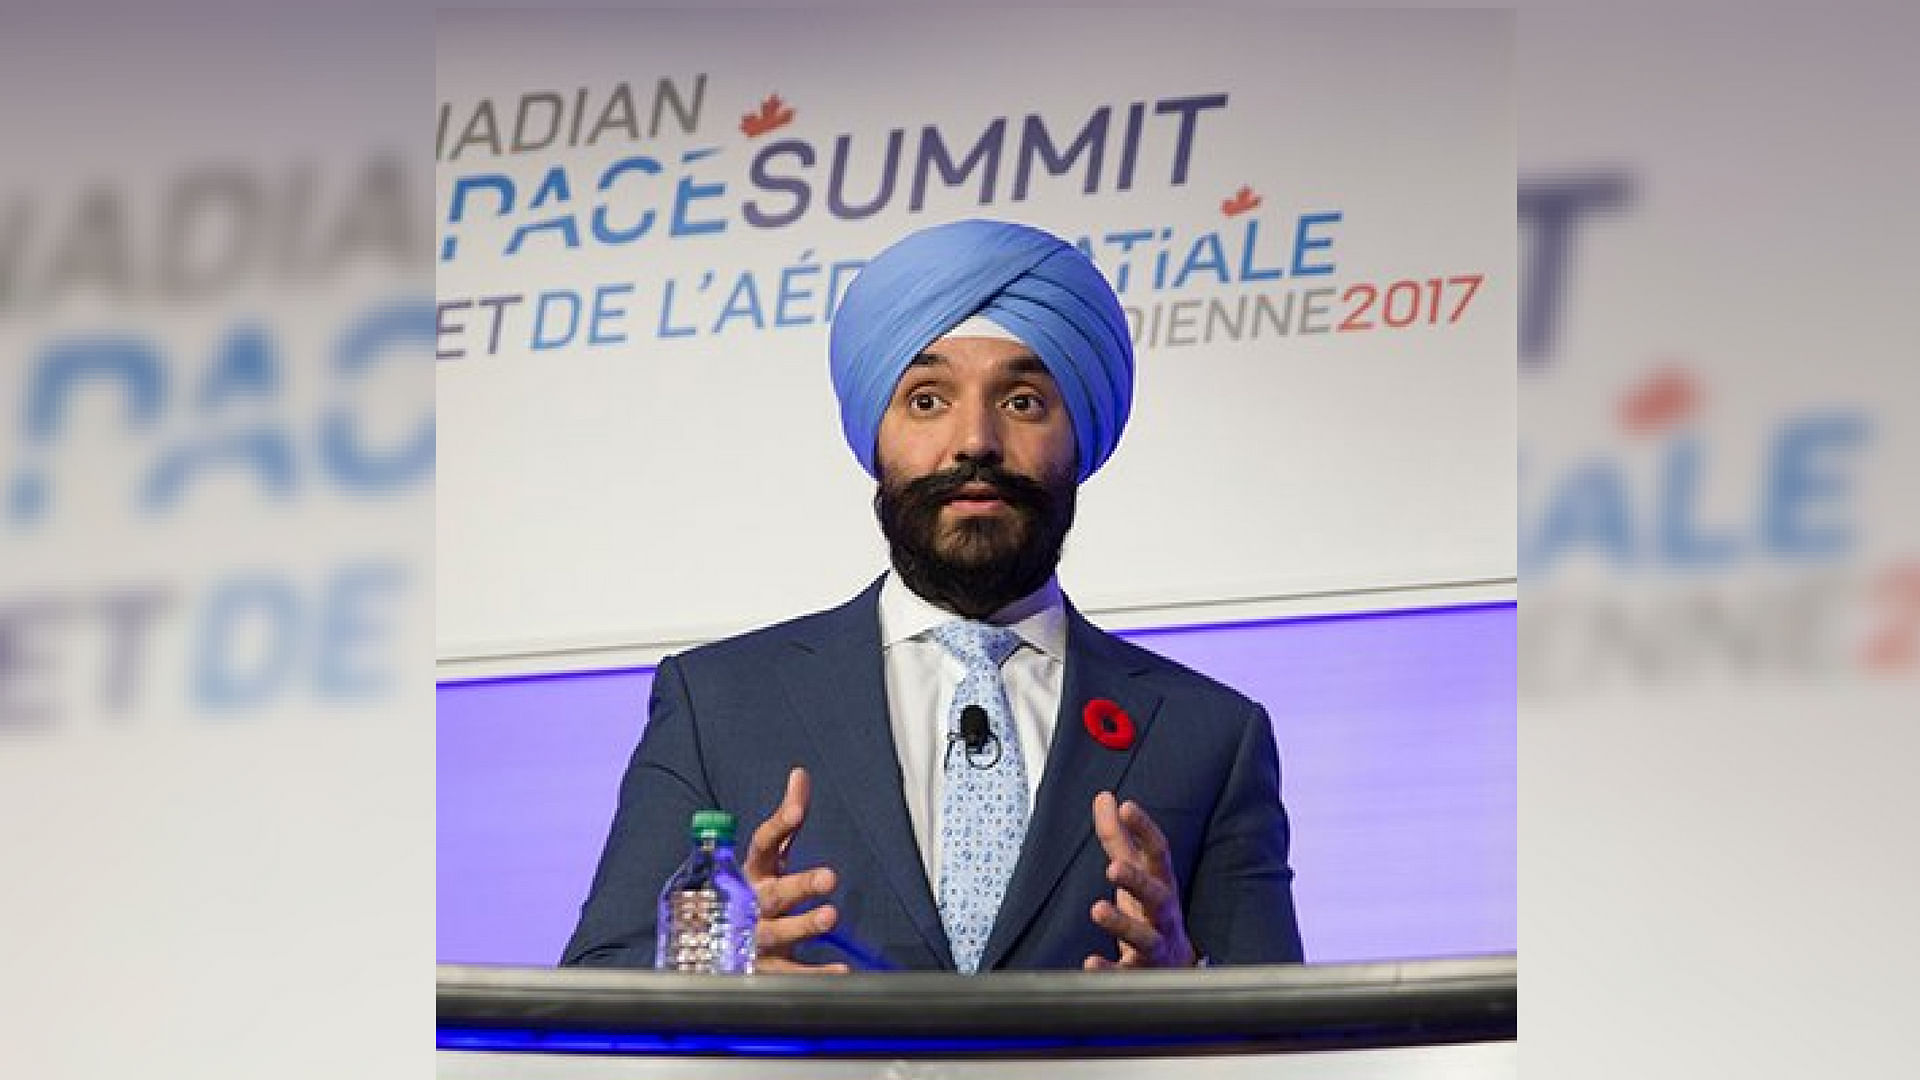 Canada’s Minister of Innovation, Science and Economic Development Navdeep Bains.